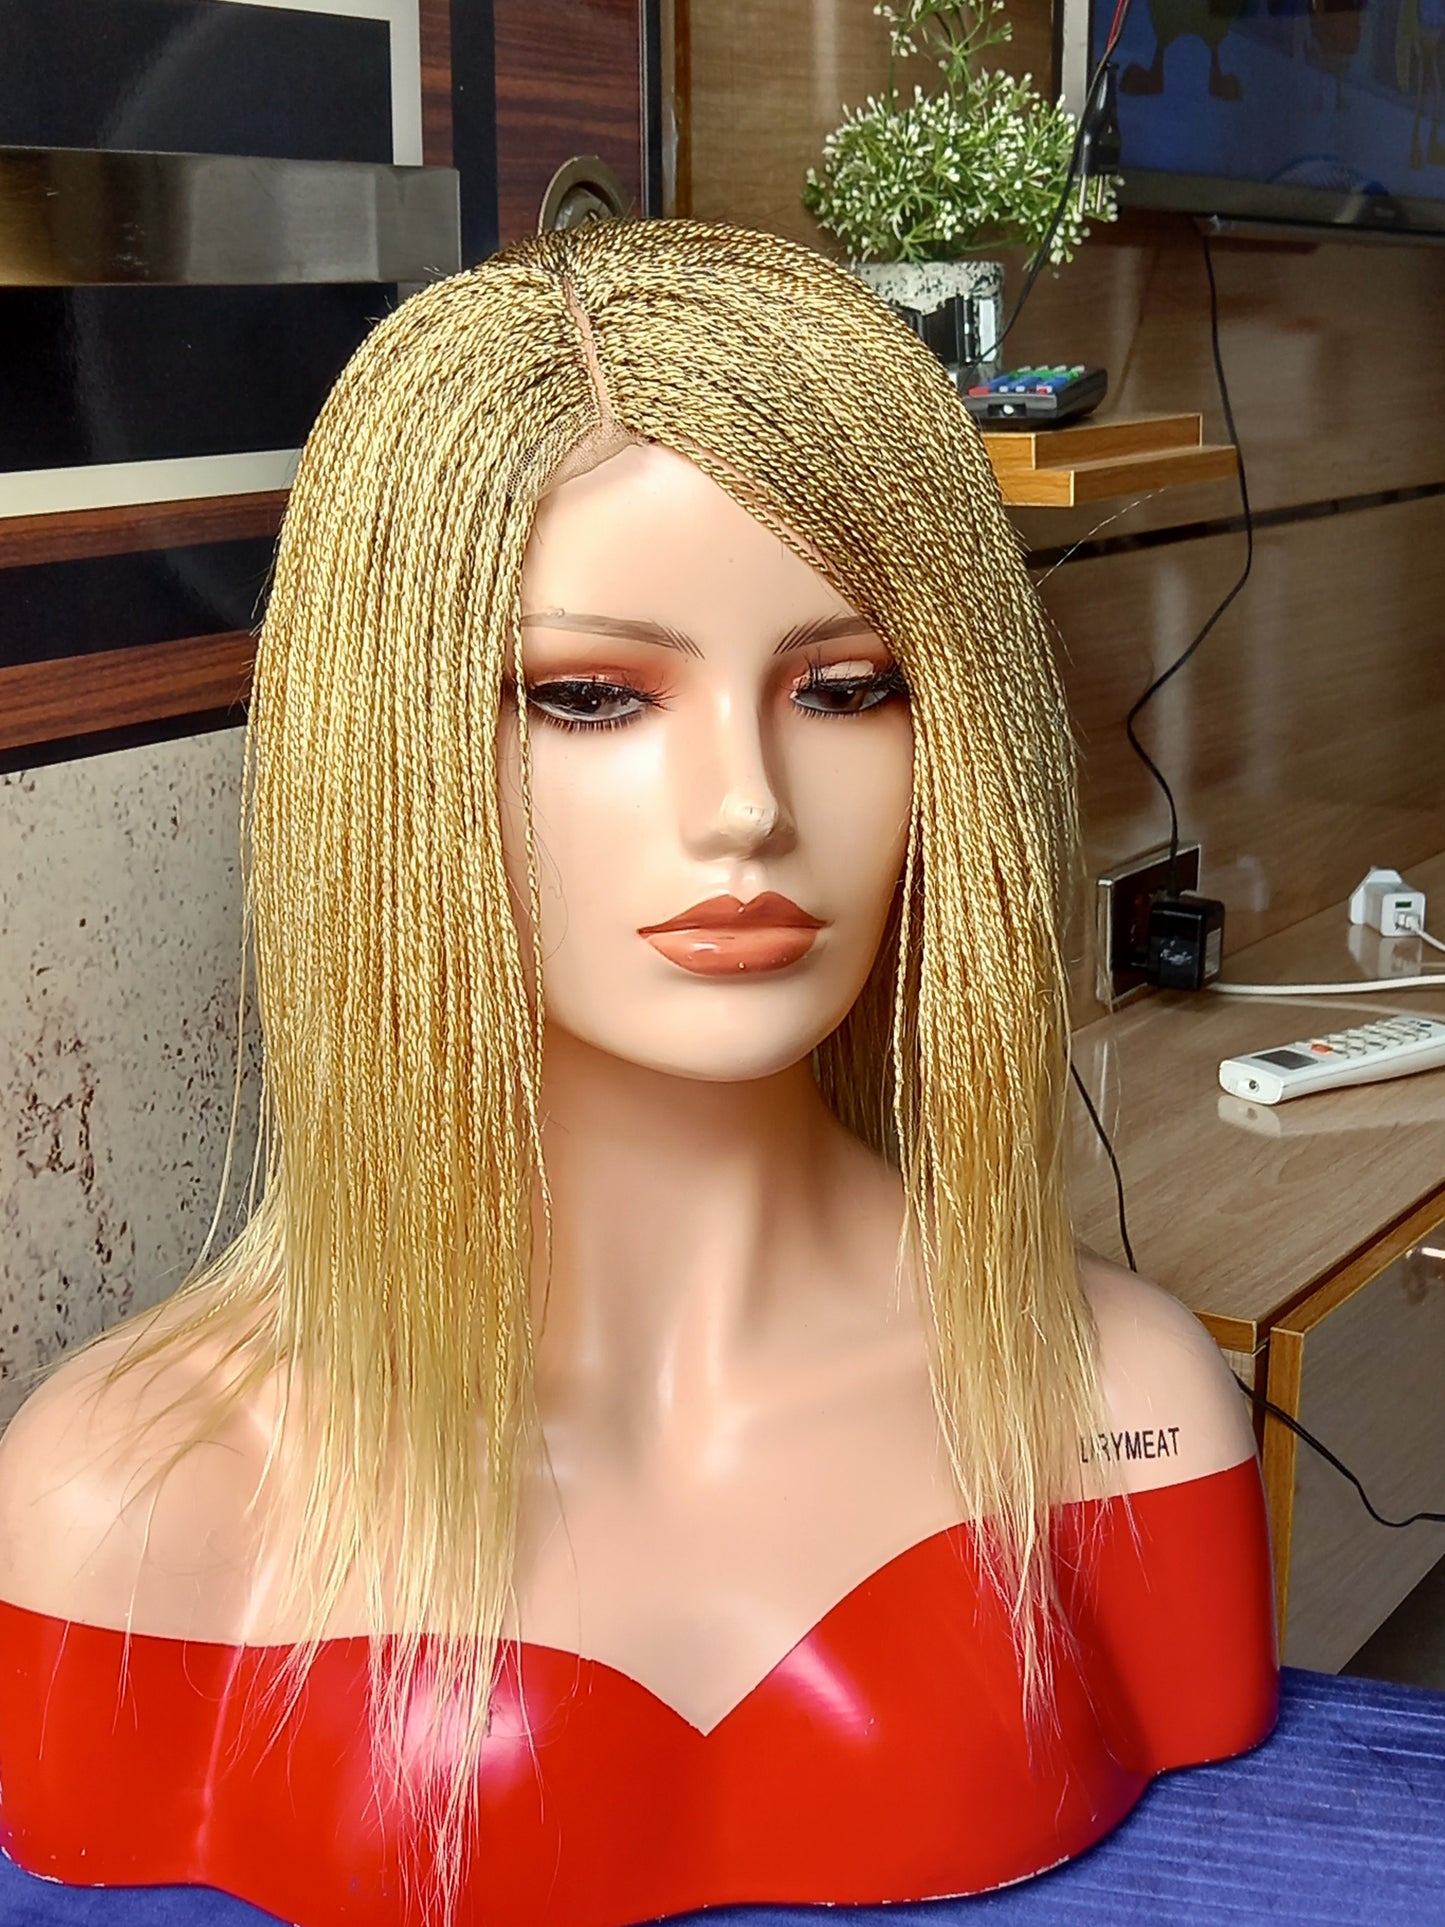 This beautiful blonde micro twist wig is a must-have for every woman. Available in different colors with free shipping on our website